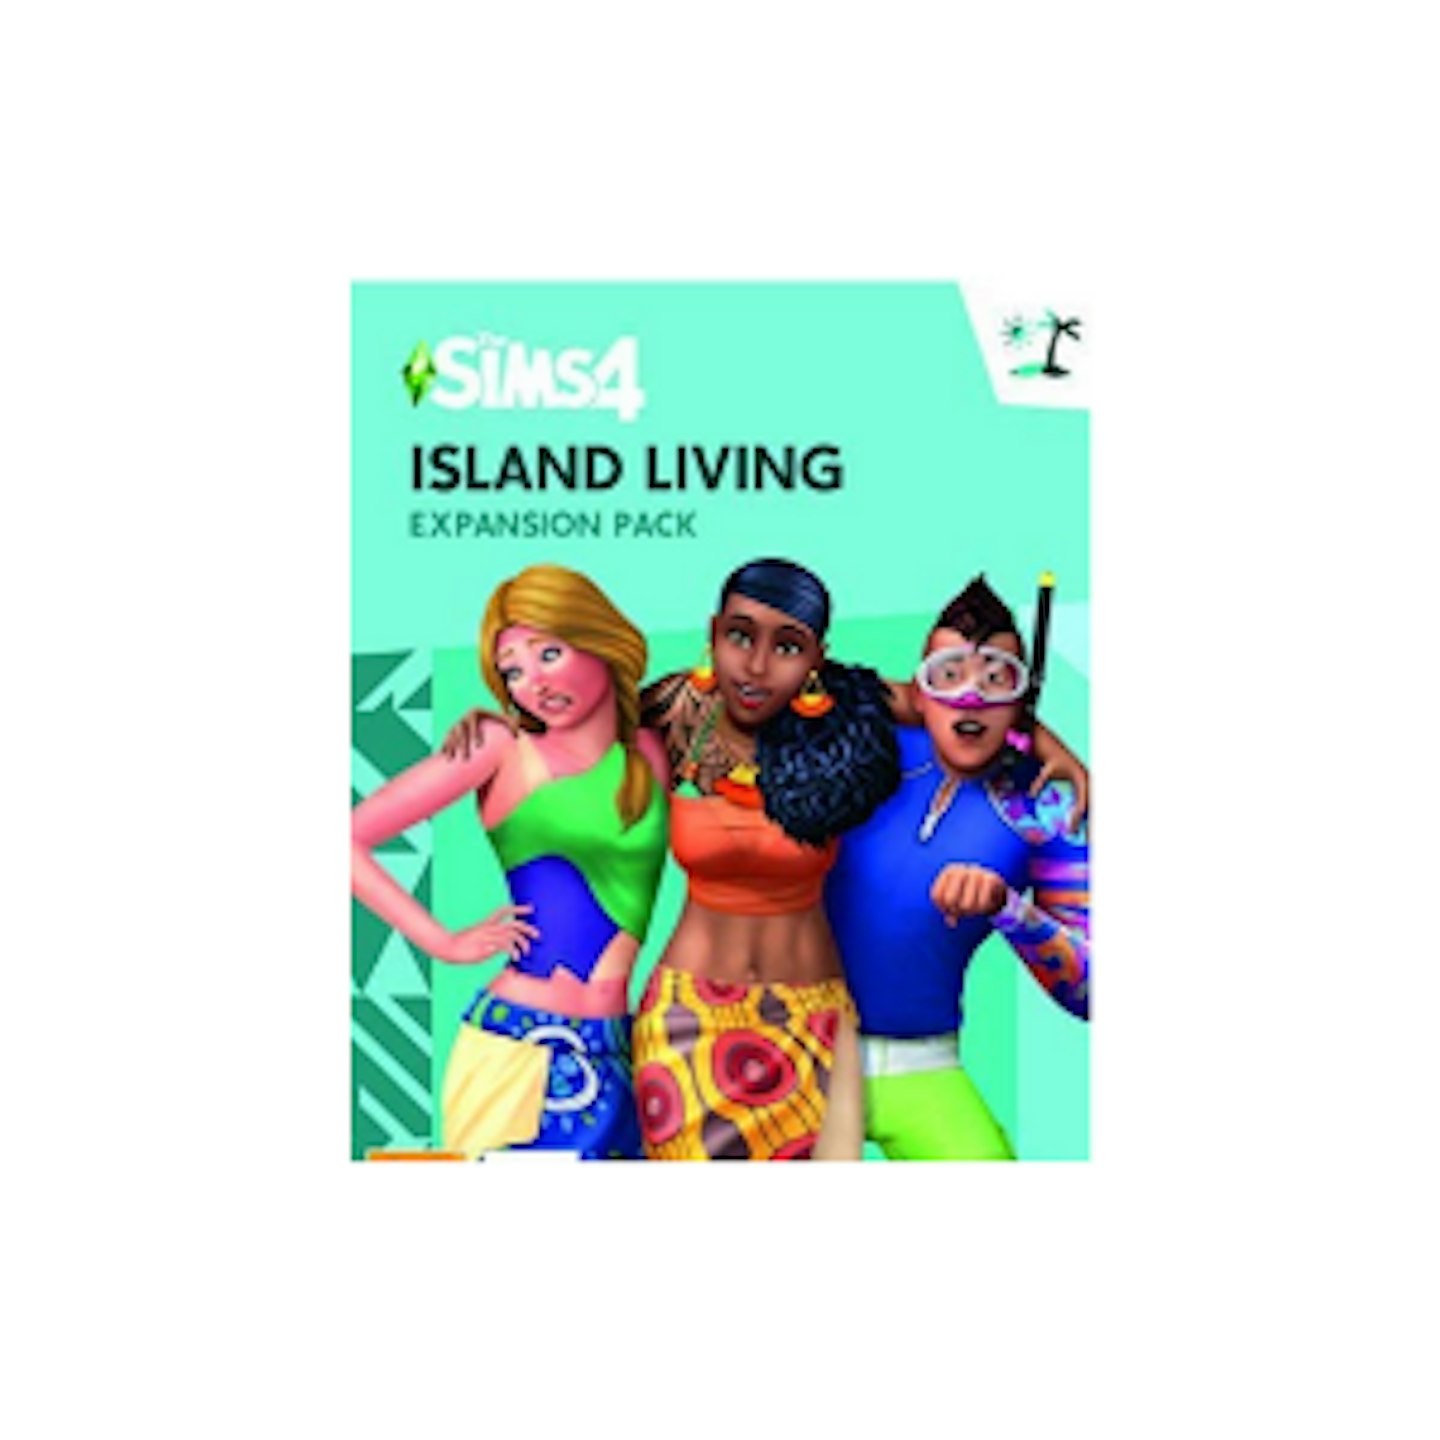 The Sims 4 - Island Living